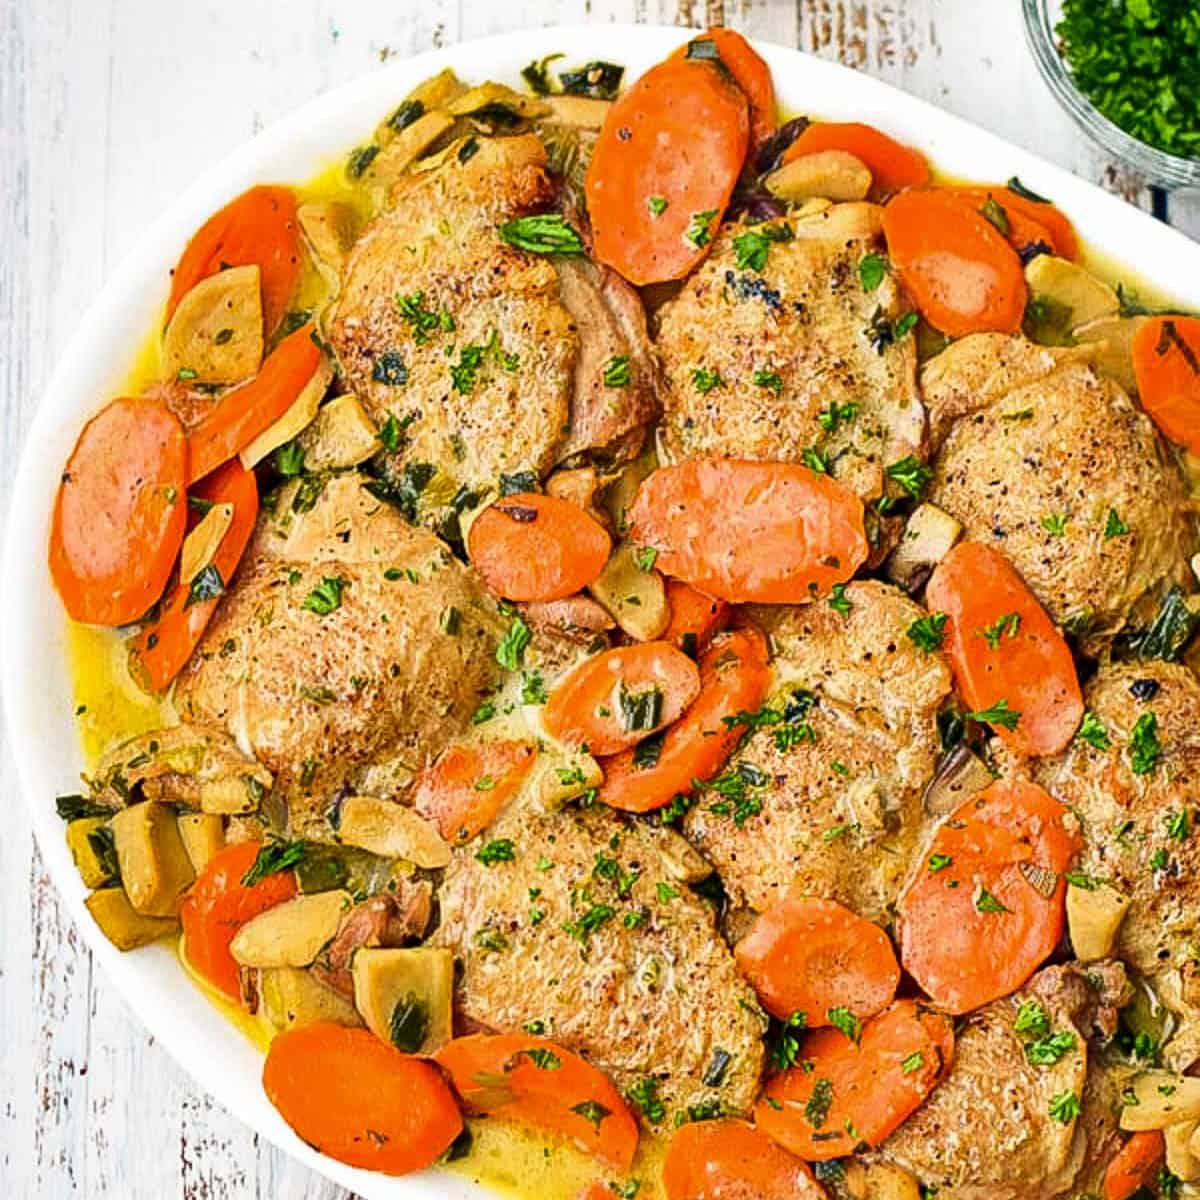 https://www.goodnomshoney.com/wp-content/uploads/2020/01/Low-FODMAP-Instant-Pot-Chicken-Fricassee-Paleo-Whole30-Featured-V2.jpg